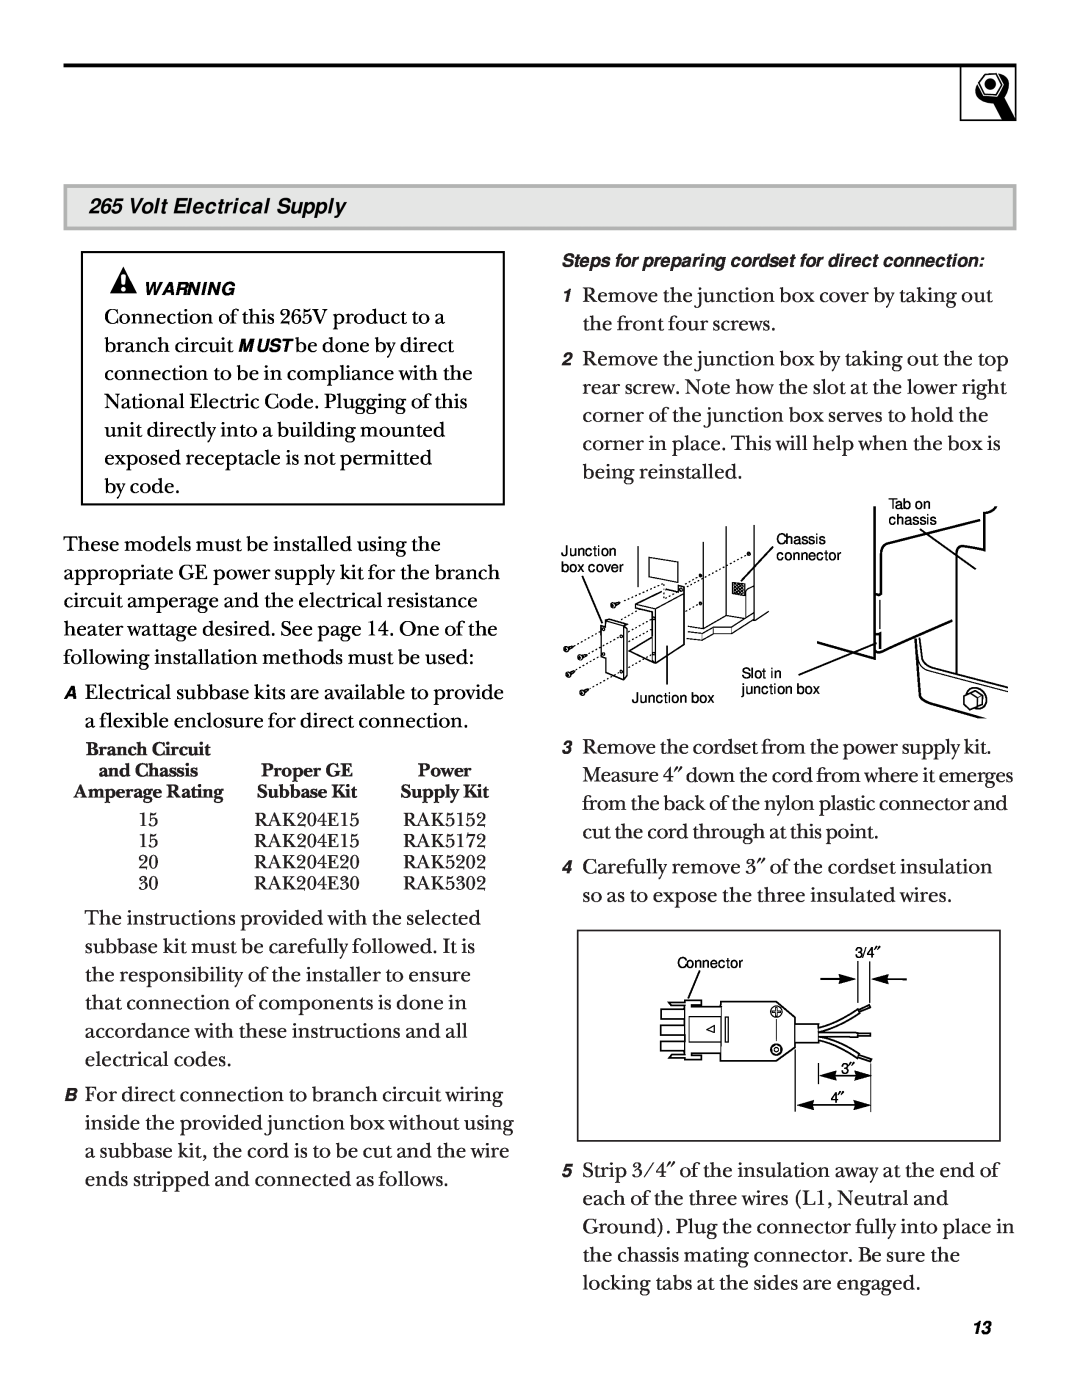 GE 5200 installation instructions Volt Electrical Supply, Steps for preparing cordset for direct connection 